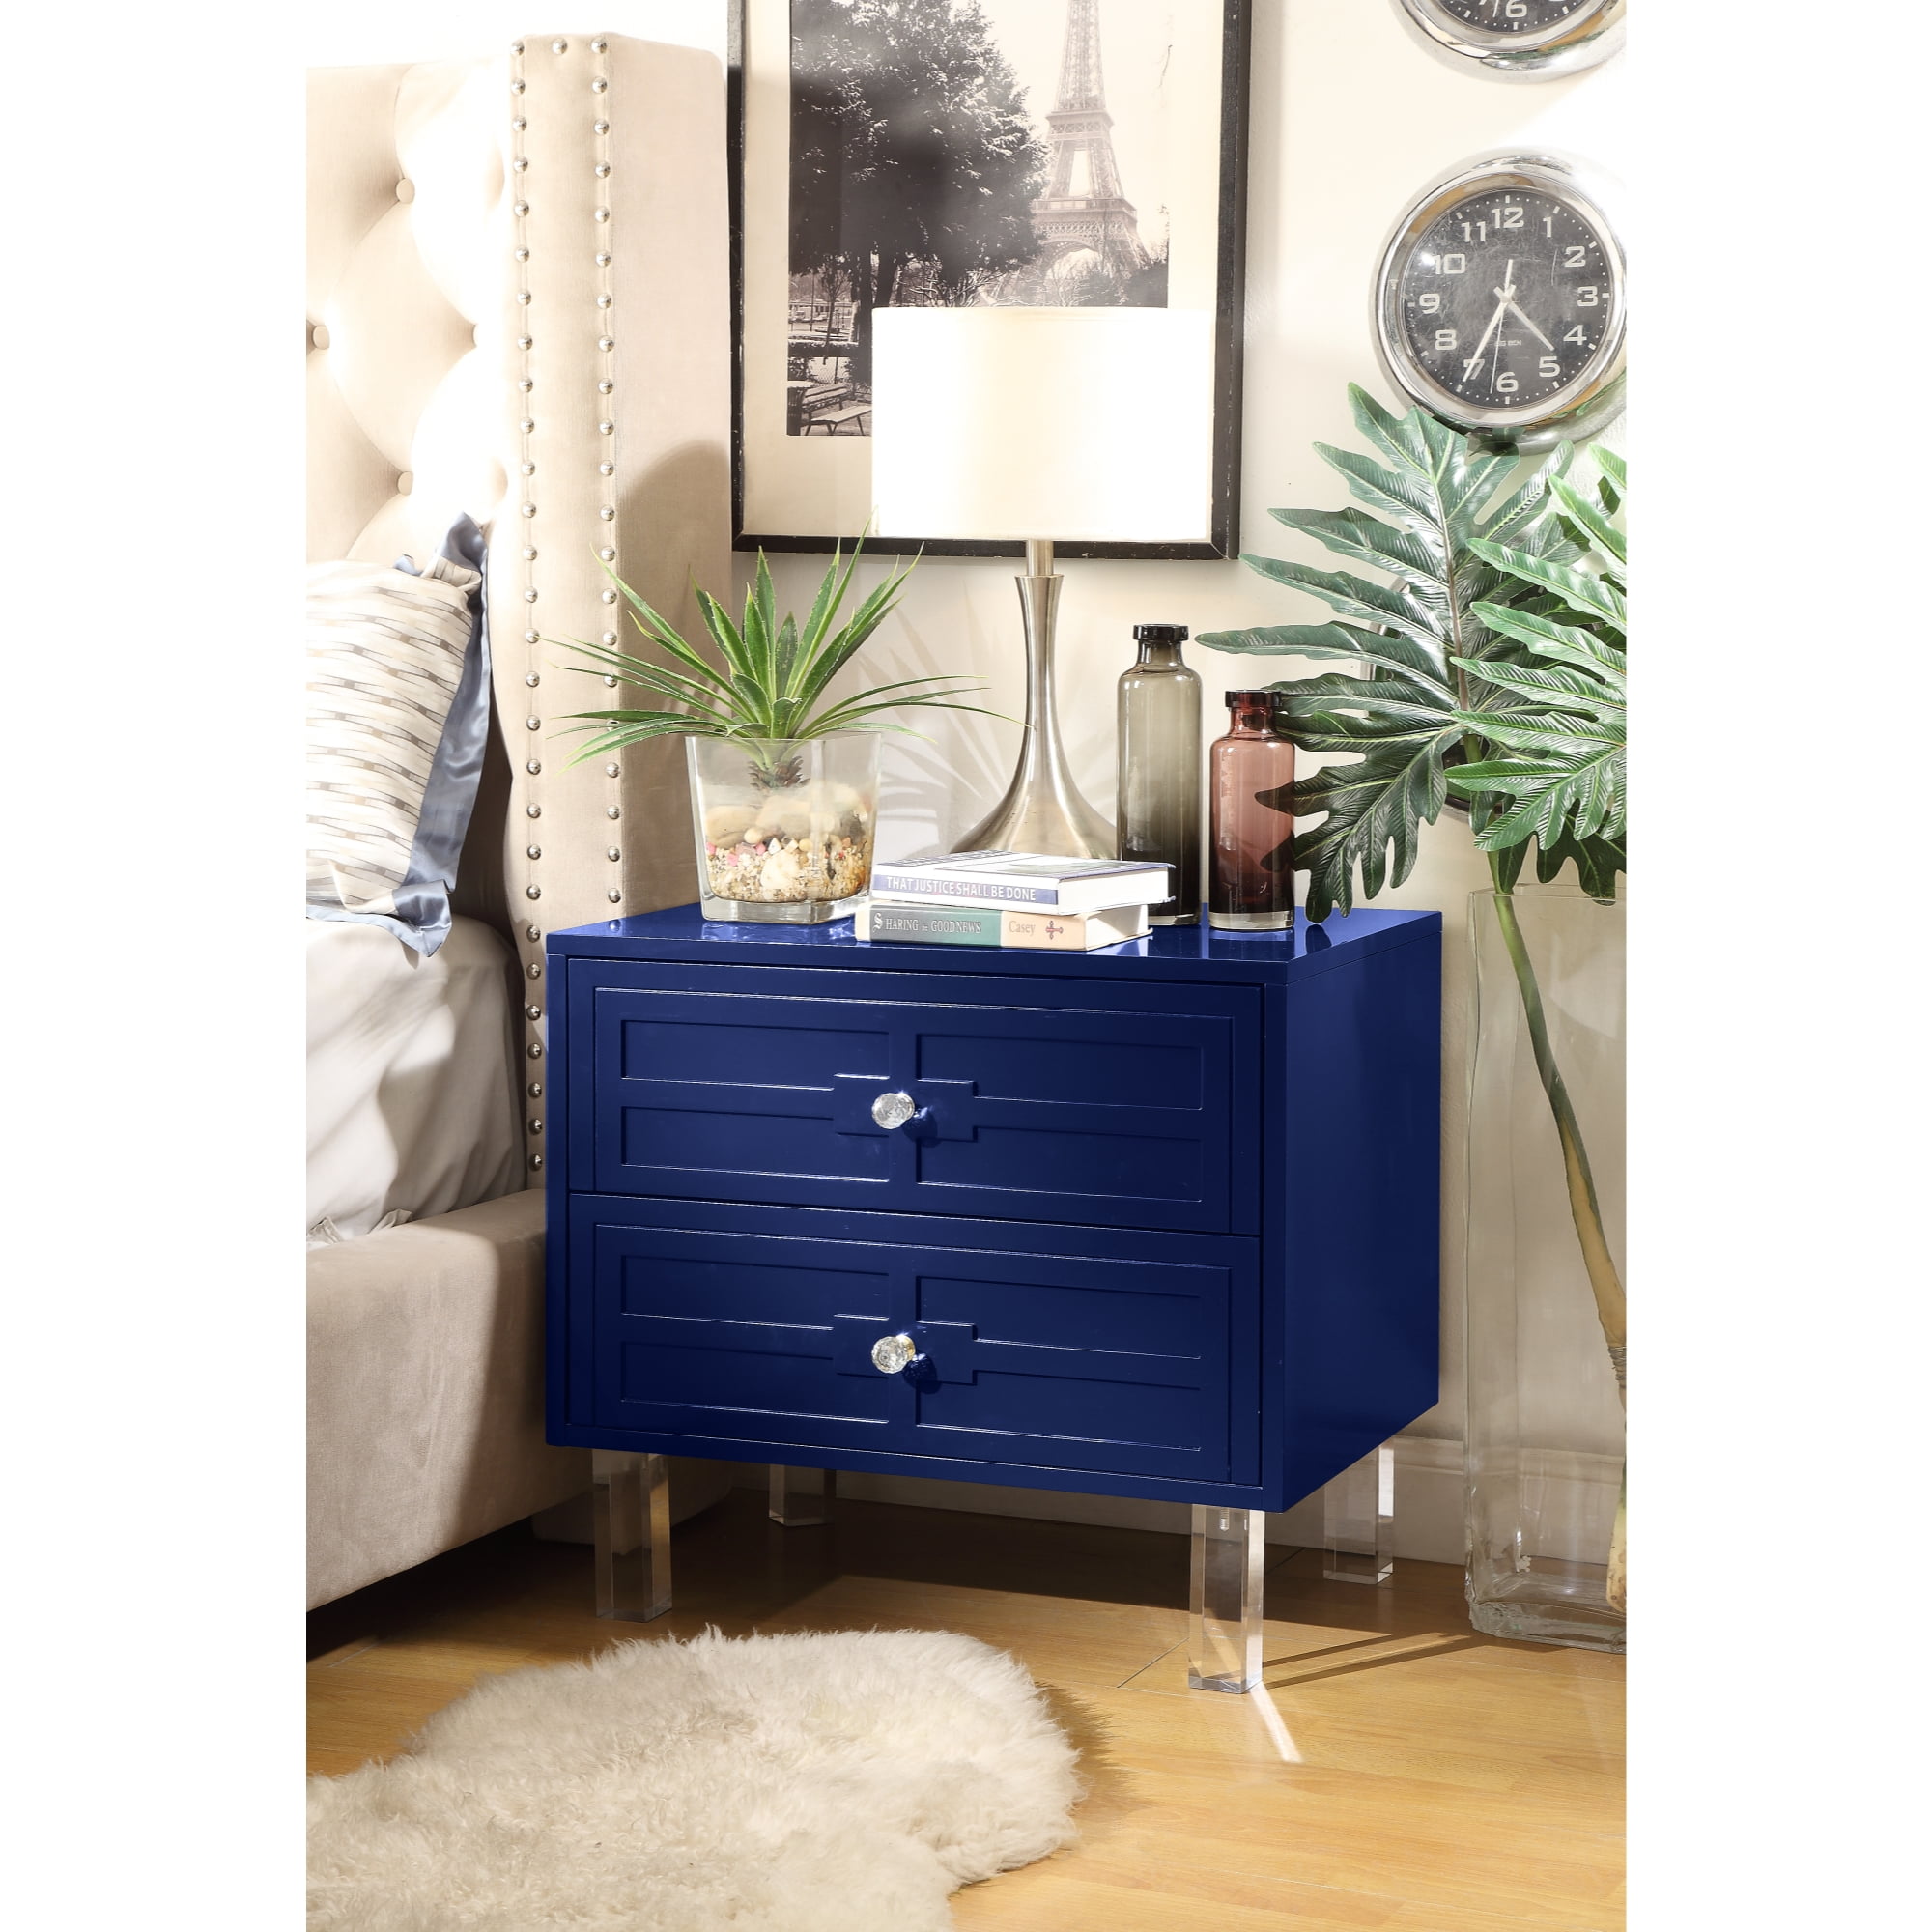 Awesome navy blue bedside table Inspired Home Anita Glossy 2 Drawer Nightstand Lacquer Finish Lucite Acrylic Legs Navy Walmart Com